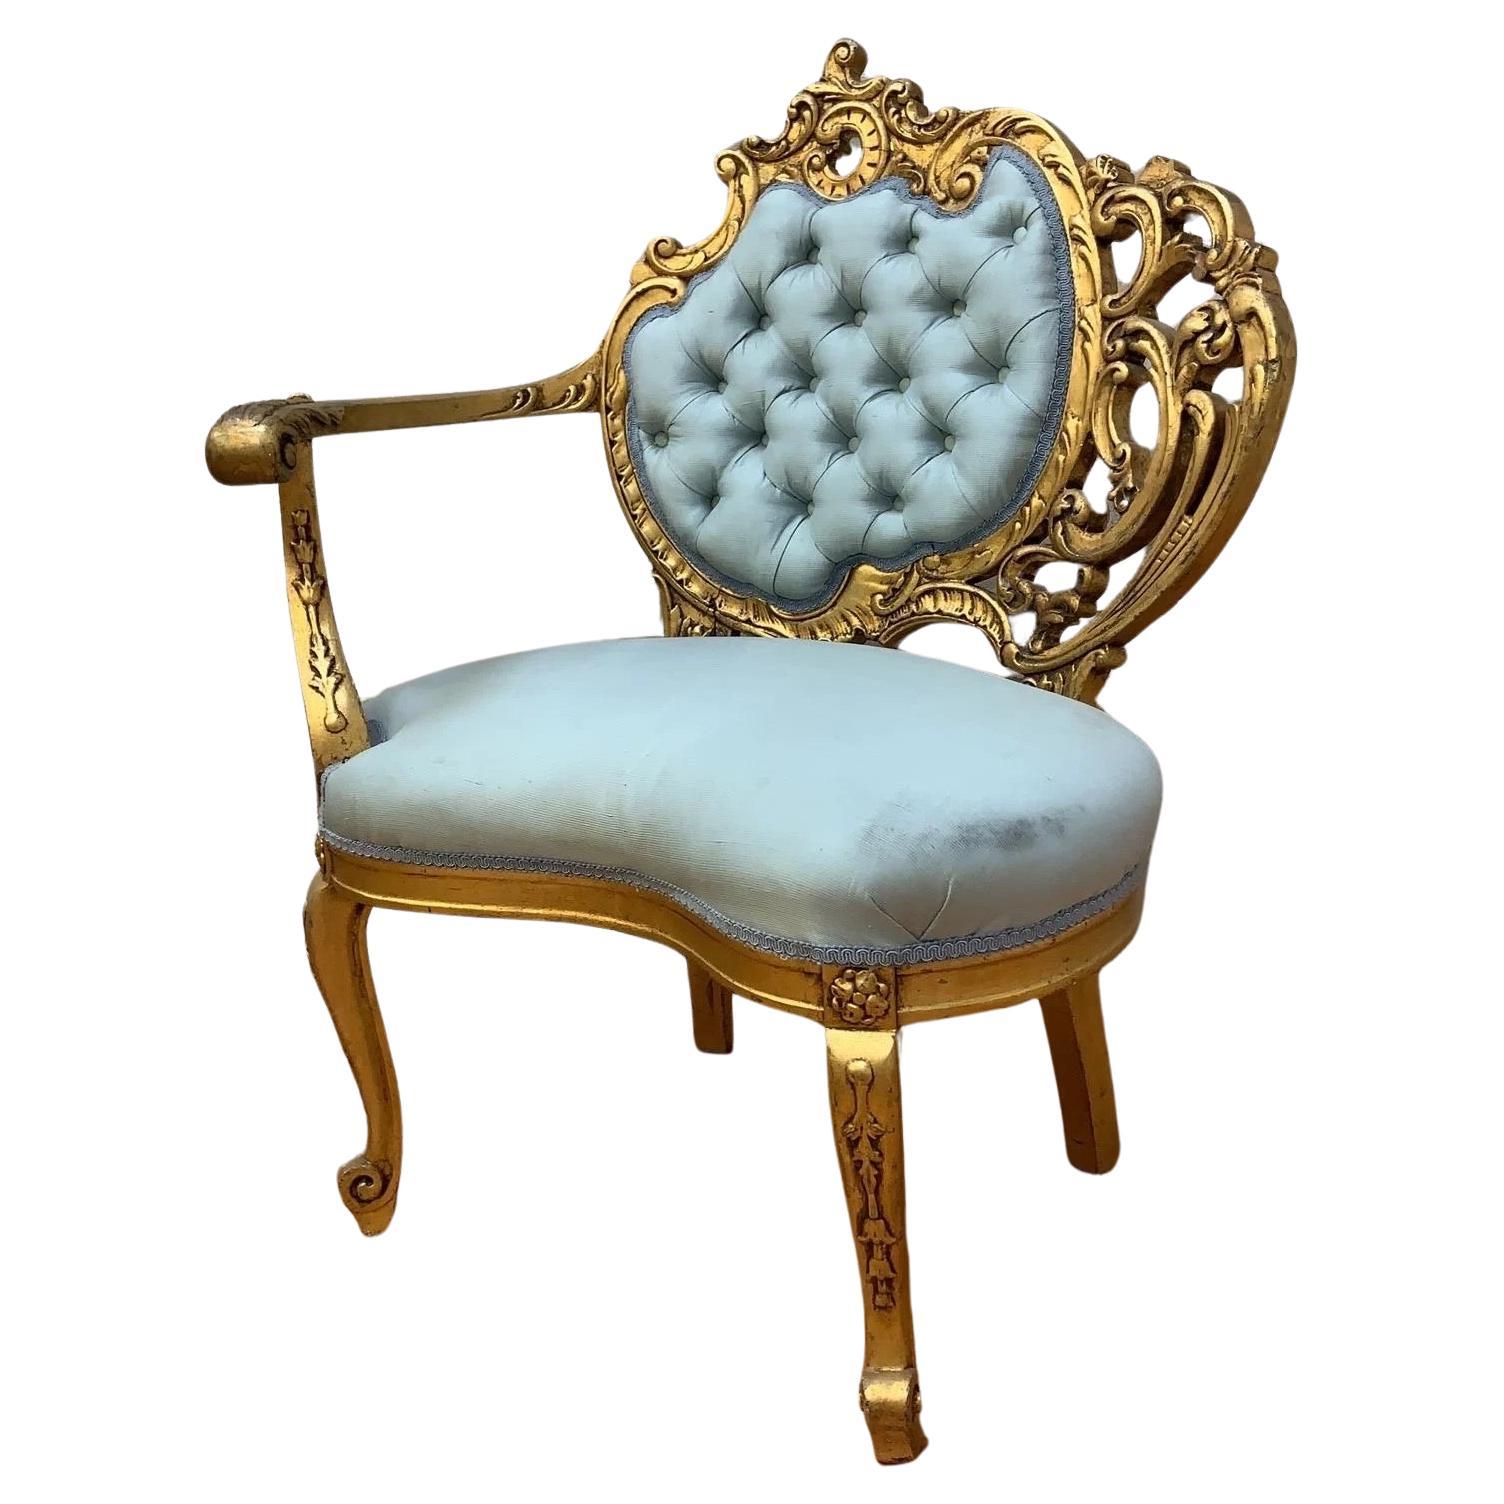 Vintage French Louis Style Carved Asymmetrical Gold-Gilded Baroque Revival Blue Silk Tufted-Back Single Arm Accent Chair 

Our vintage asymmetrical Baroque revival accent chair is a true masterpiece of elegance and sophistication. This chair